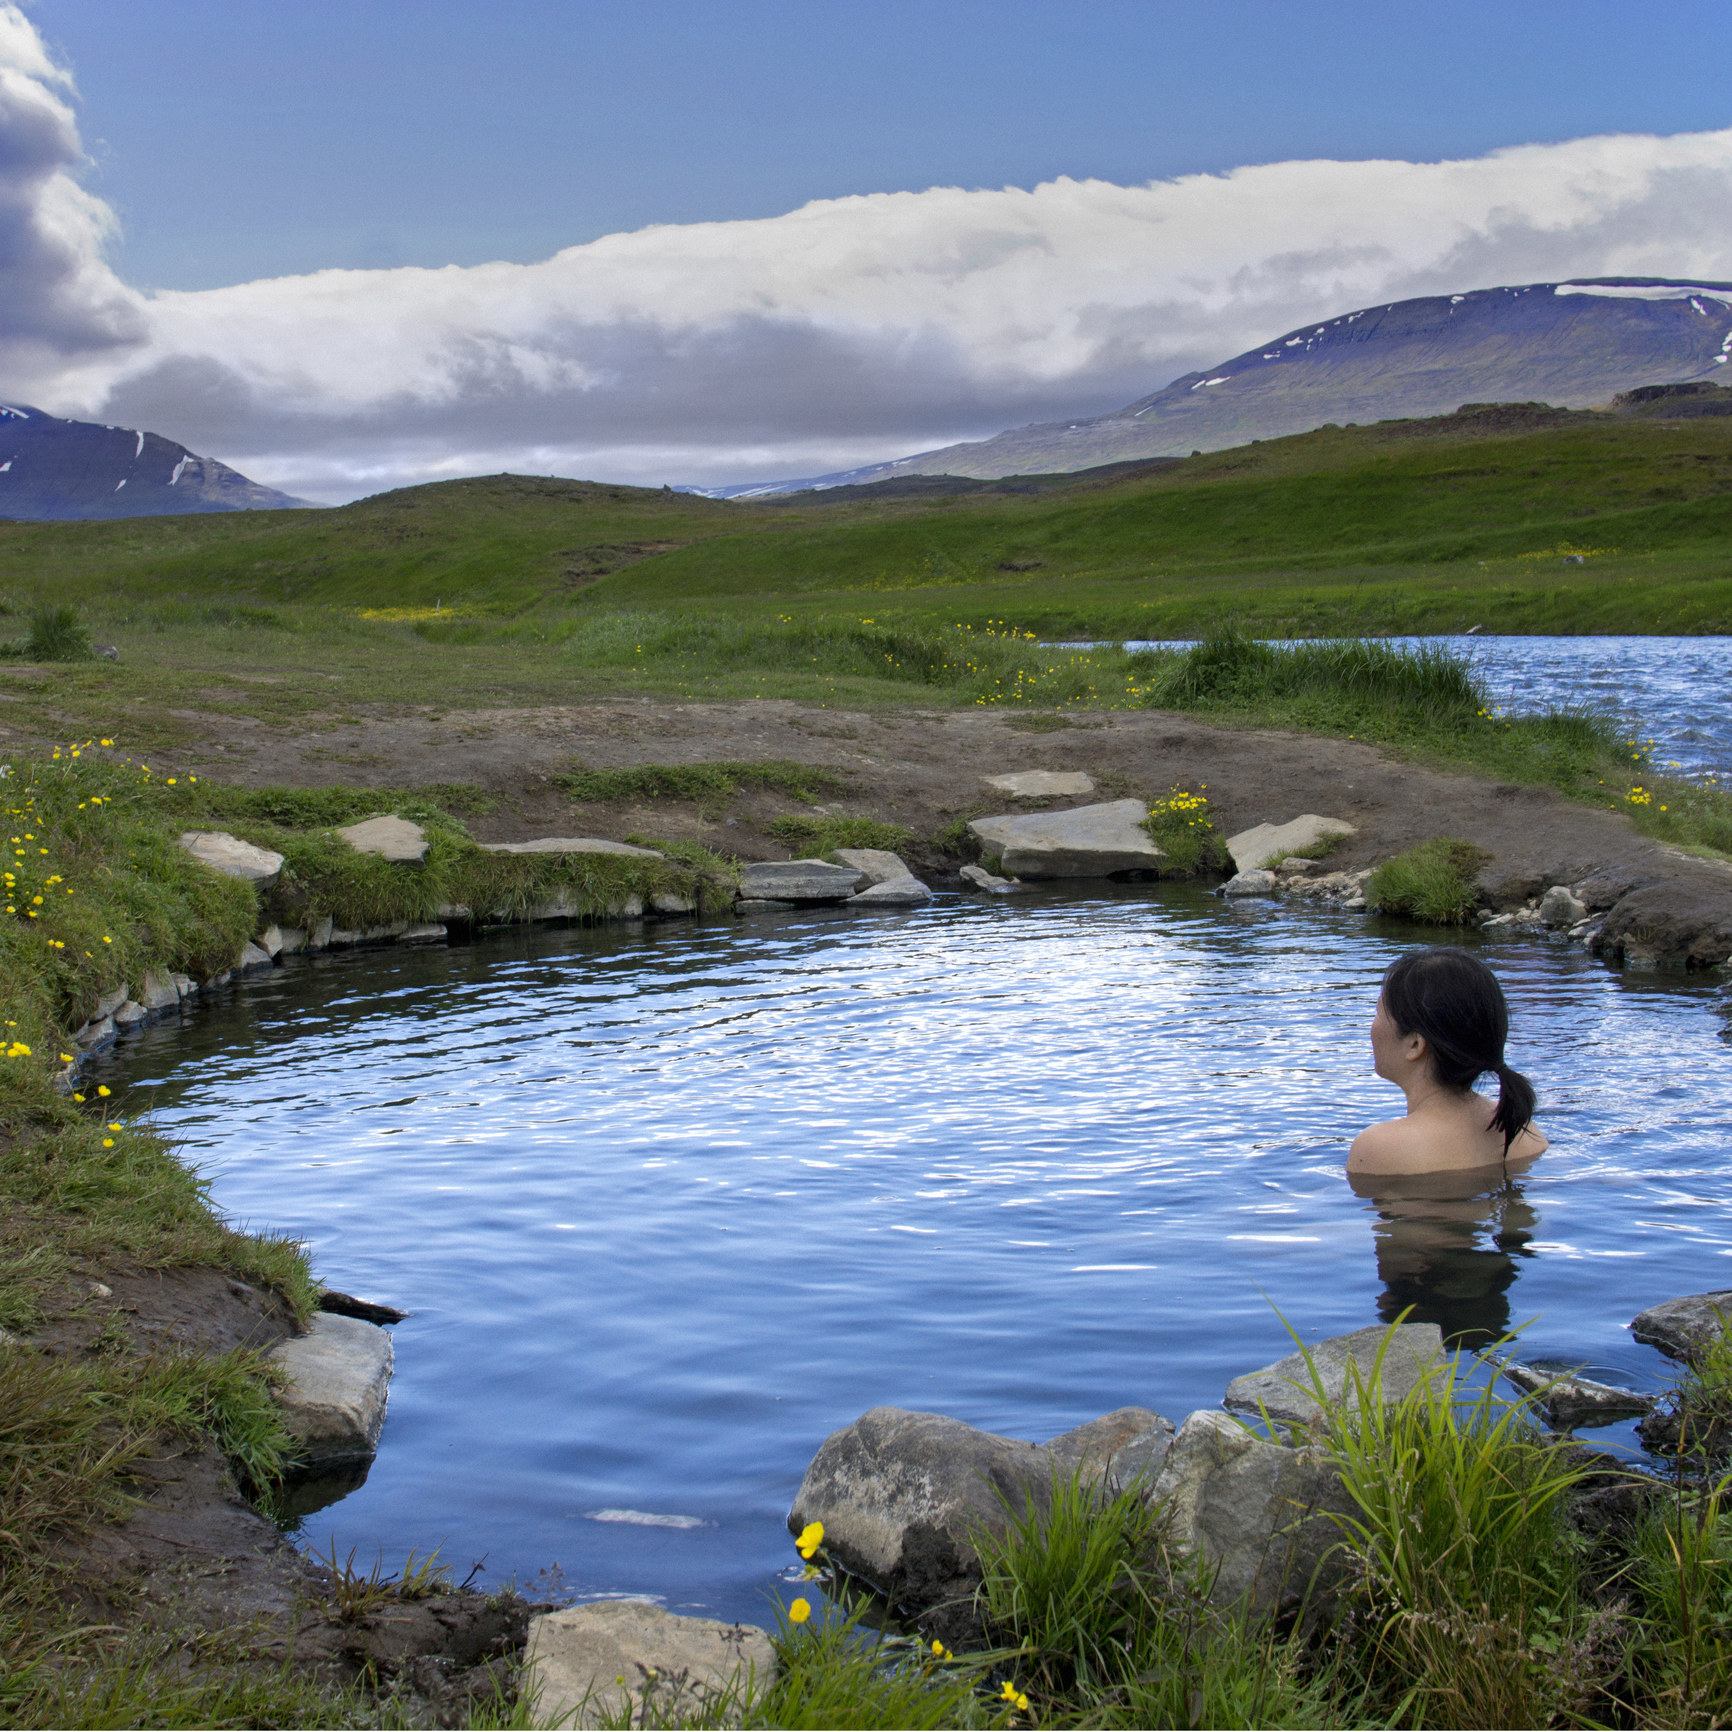 A woman sitting in a hot spring.